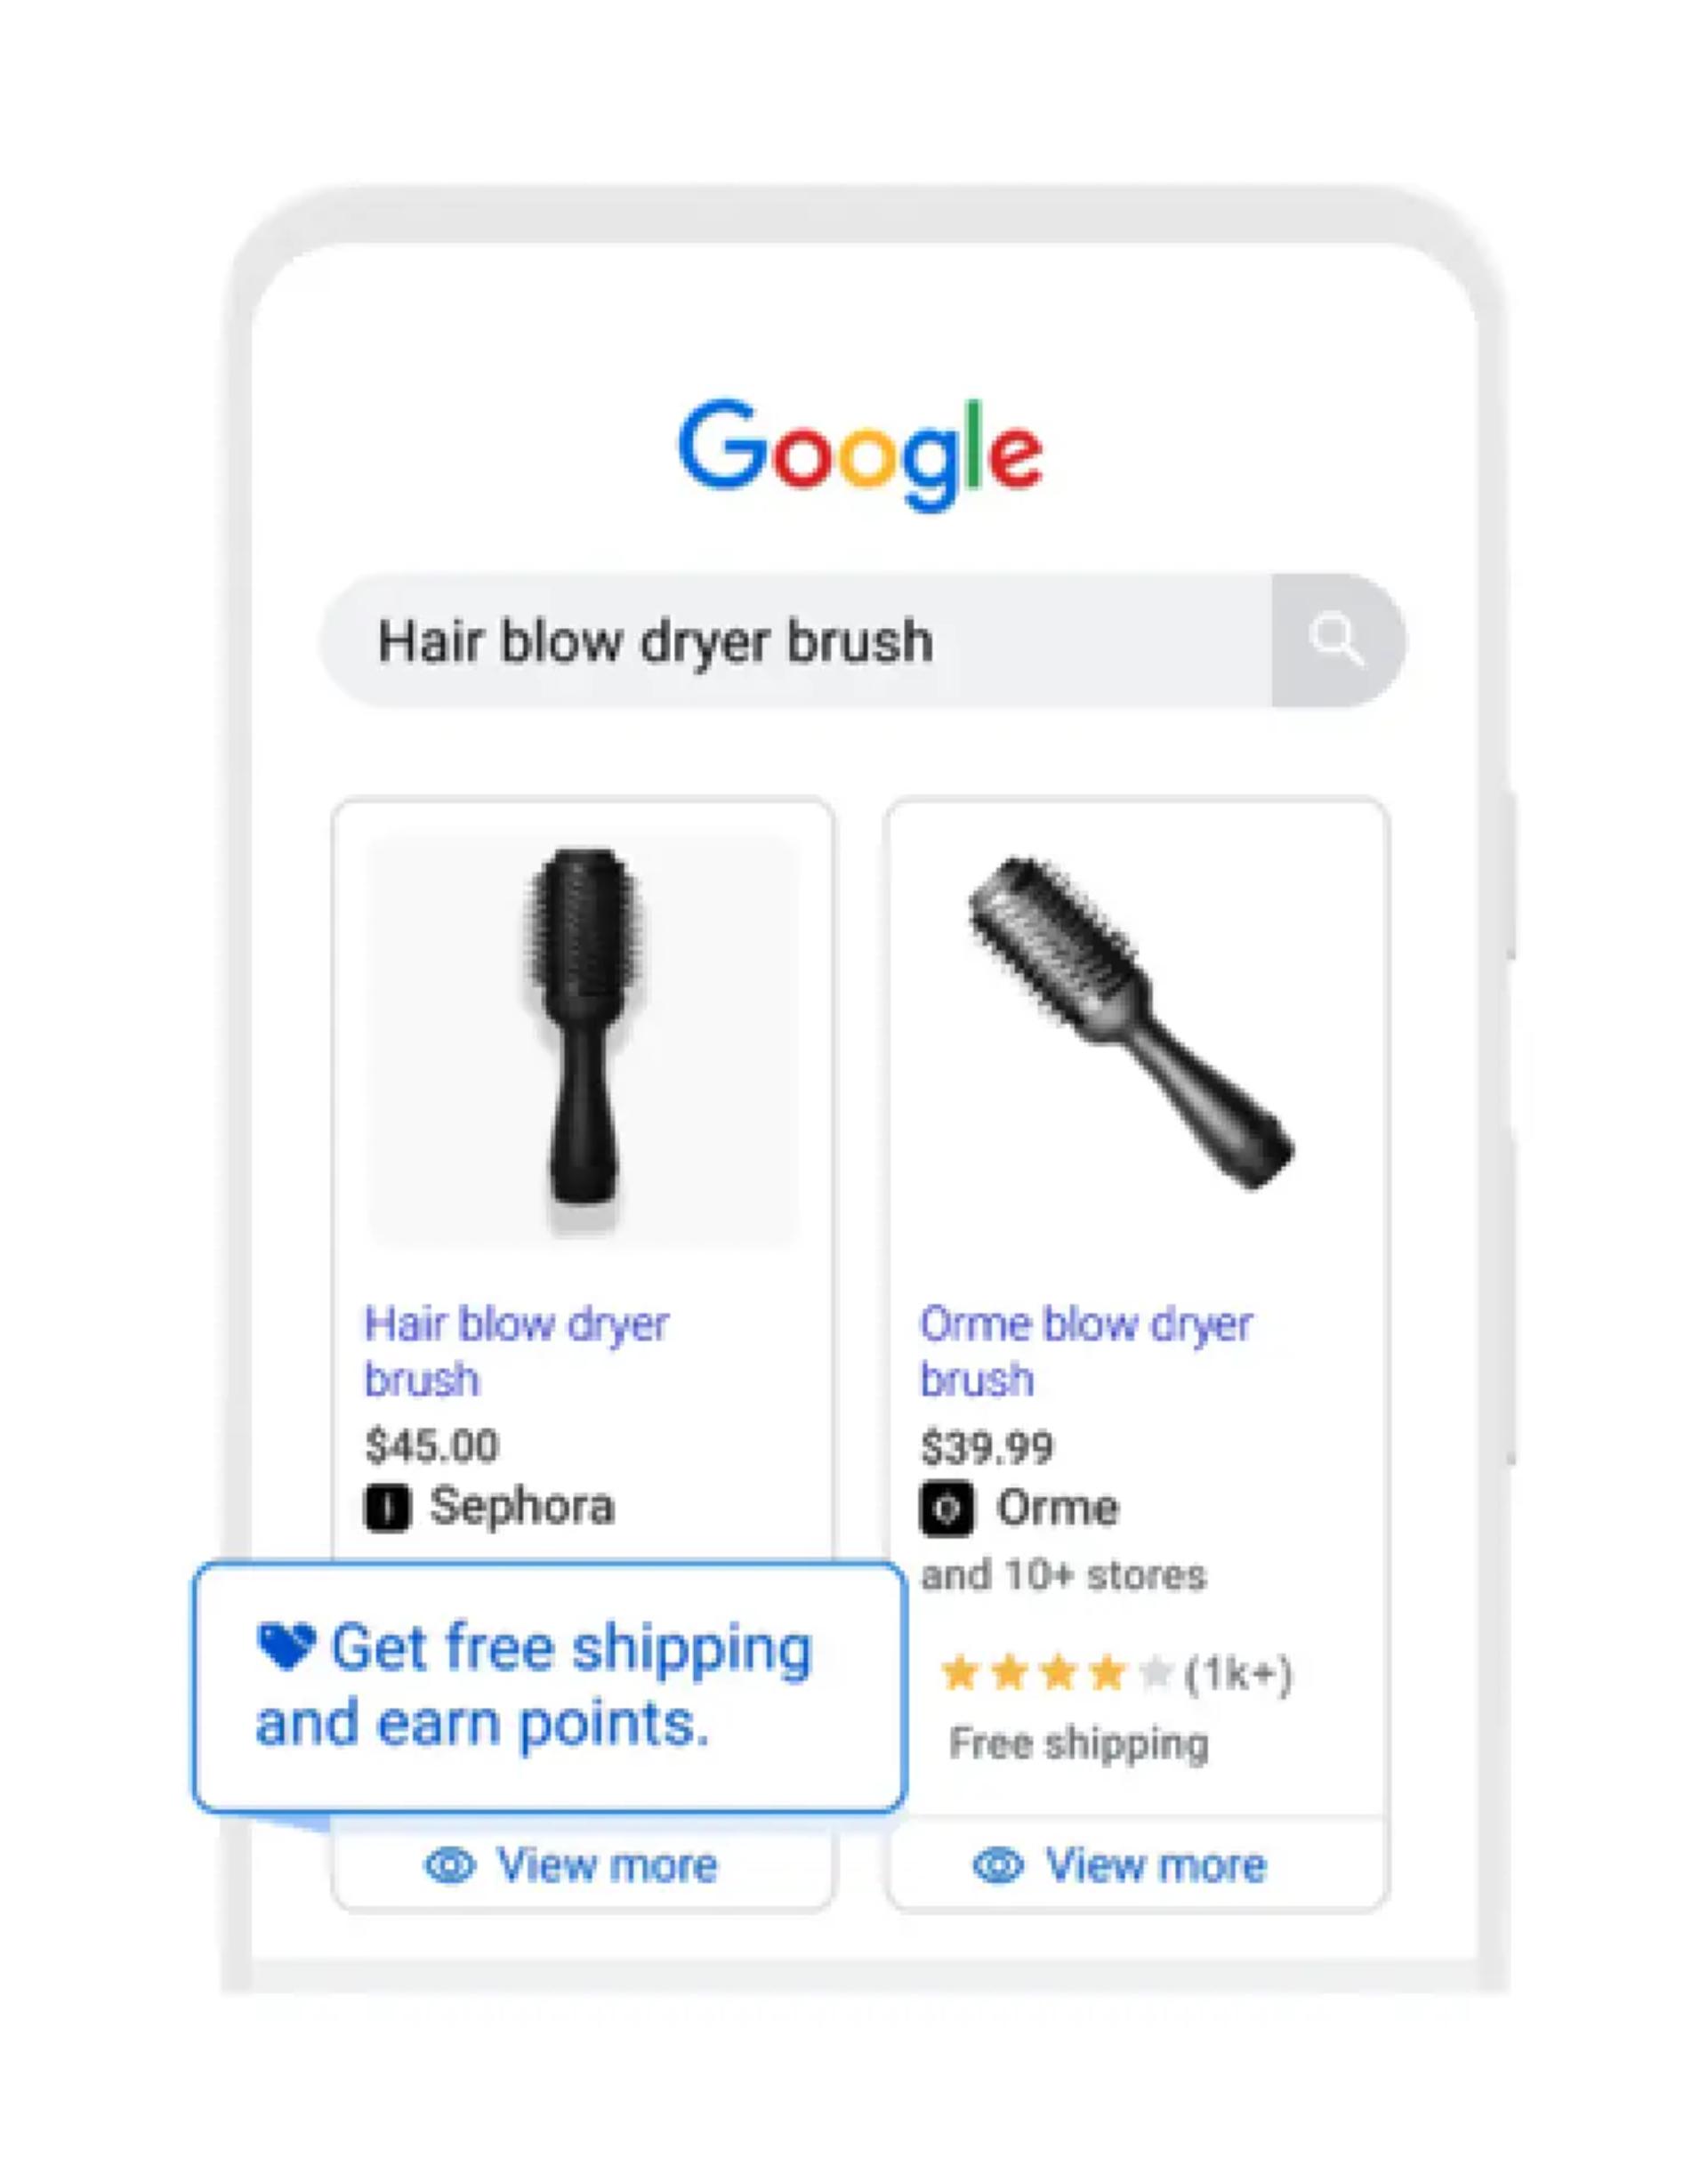 A mobile phone screen showing the search query “hair blow dryer brush.” One of the results shows a tag that says “Get free shipping and earn points.”